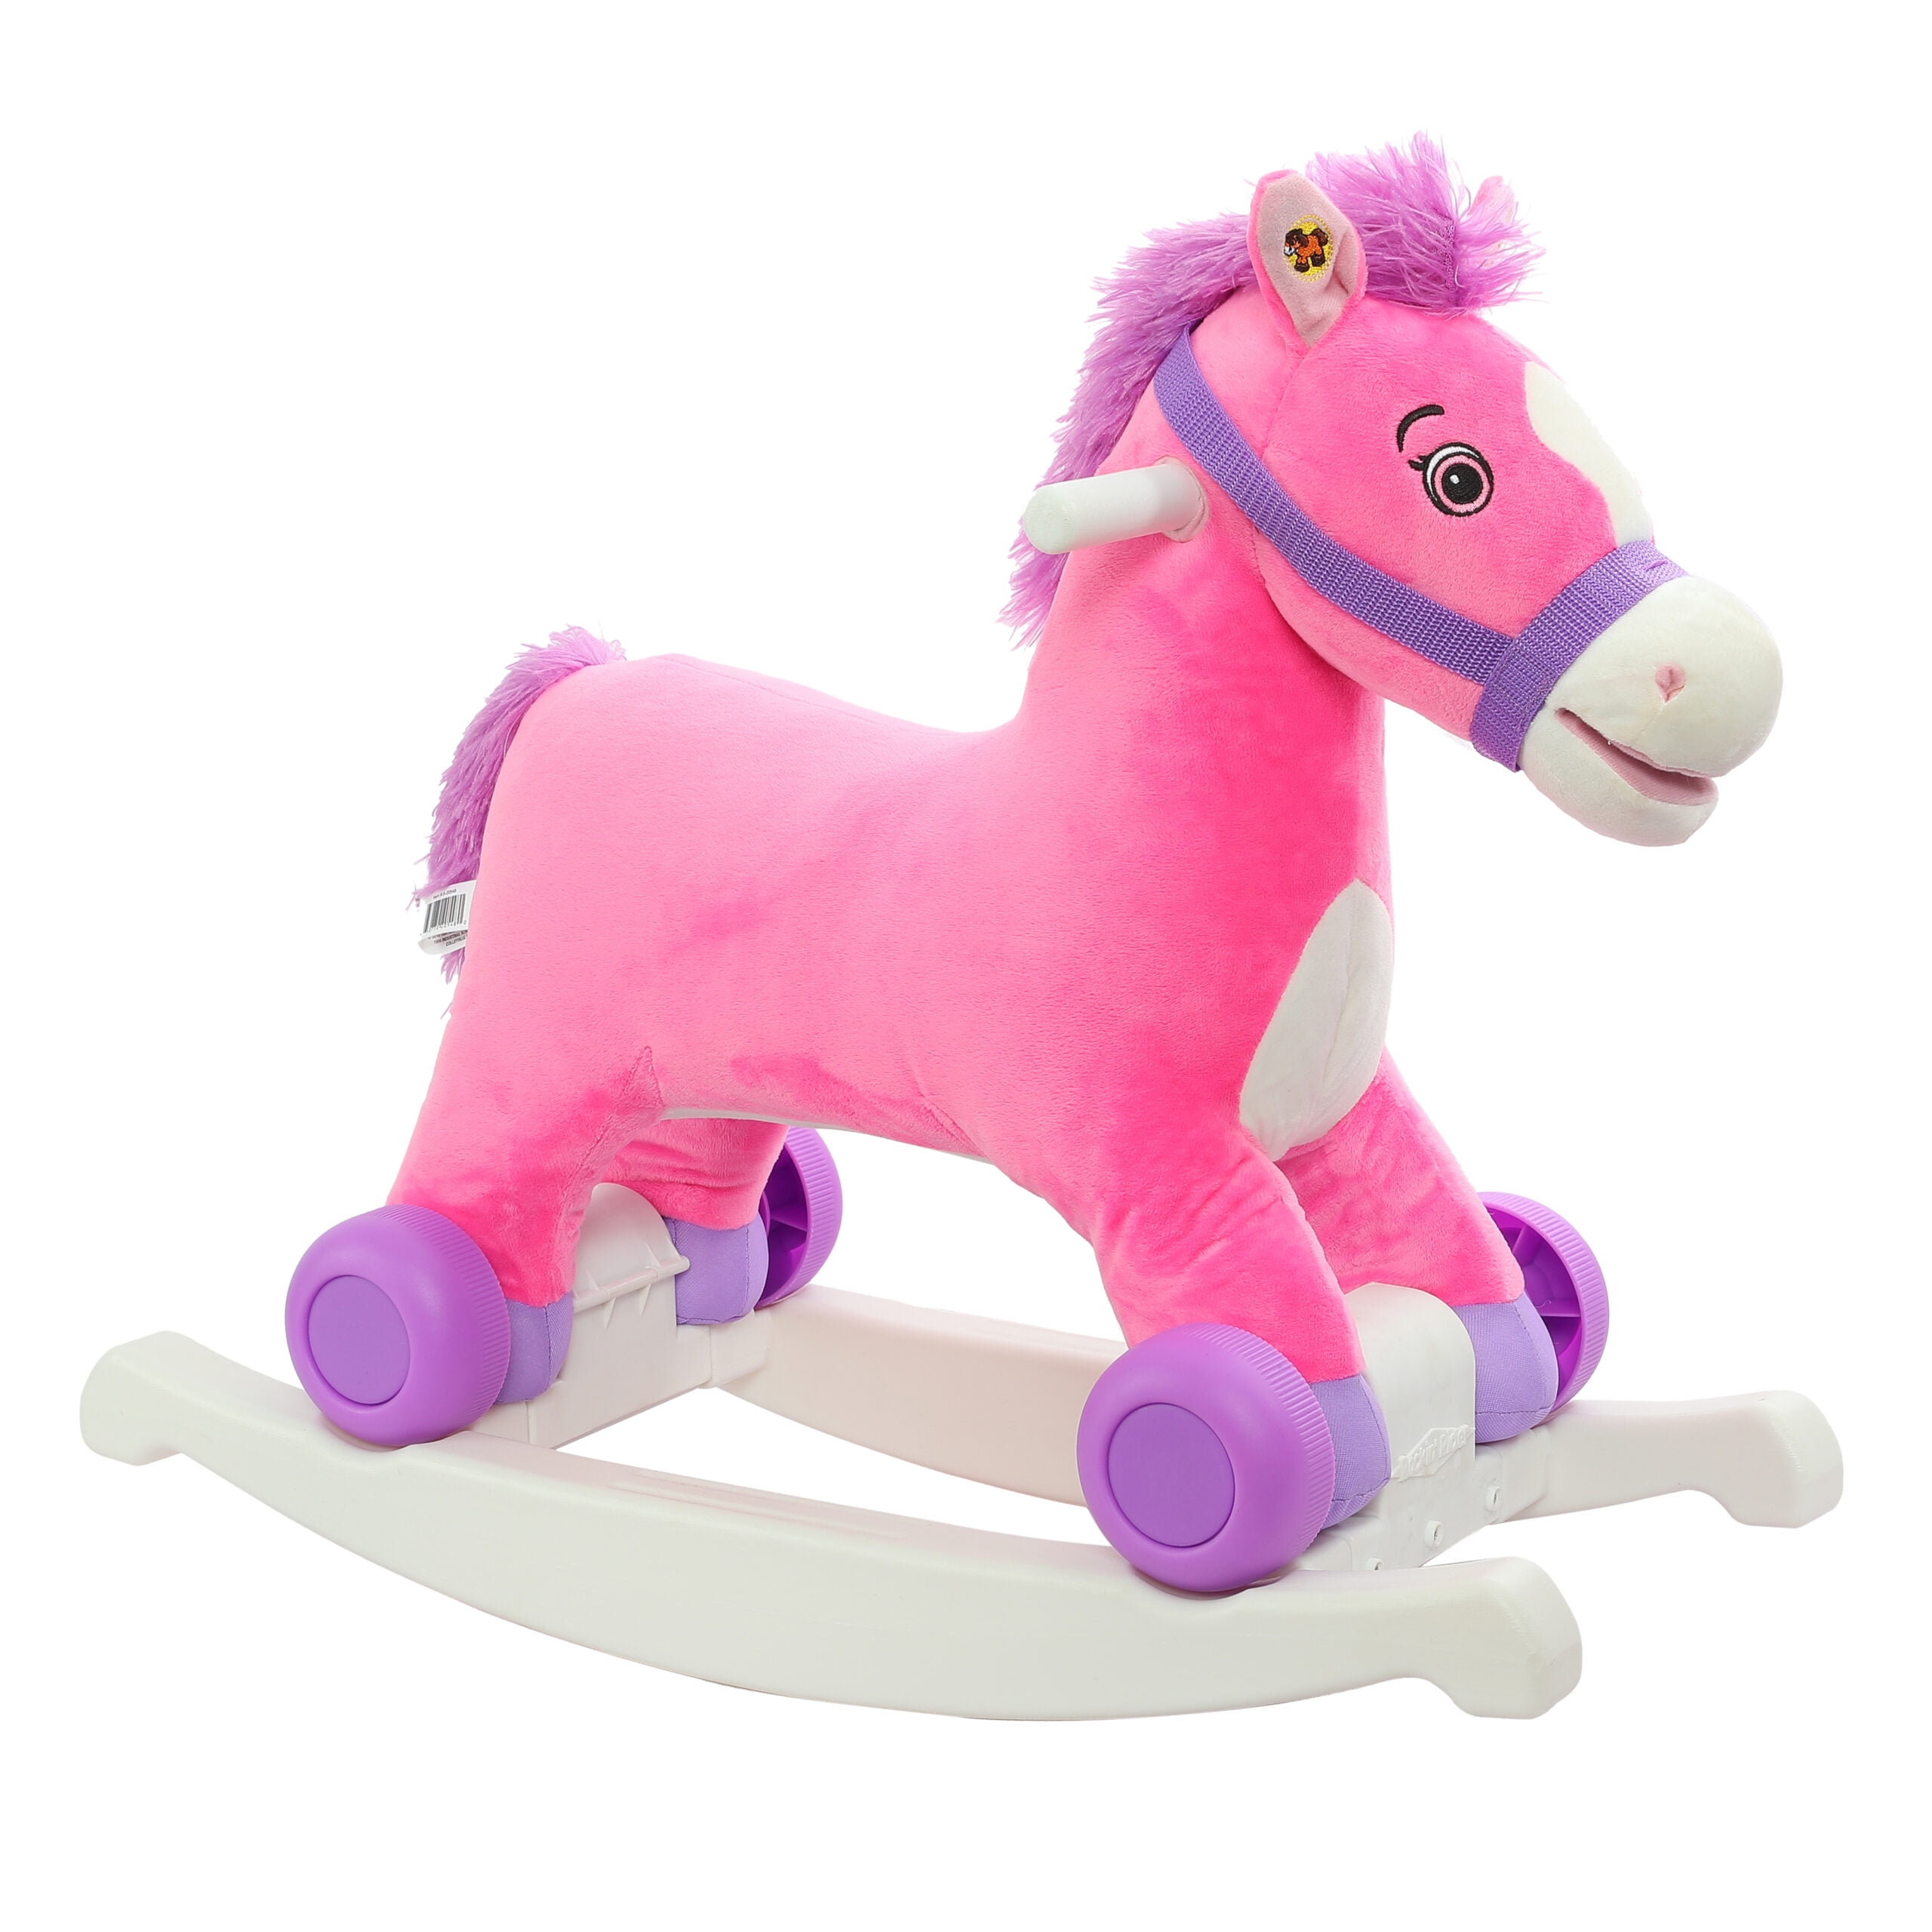 Kids Plush Ride On Toy Horse Rockin' Rider Charger 2-in-1 ROLLING Pony TALKING